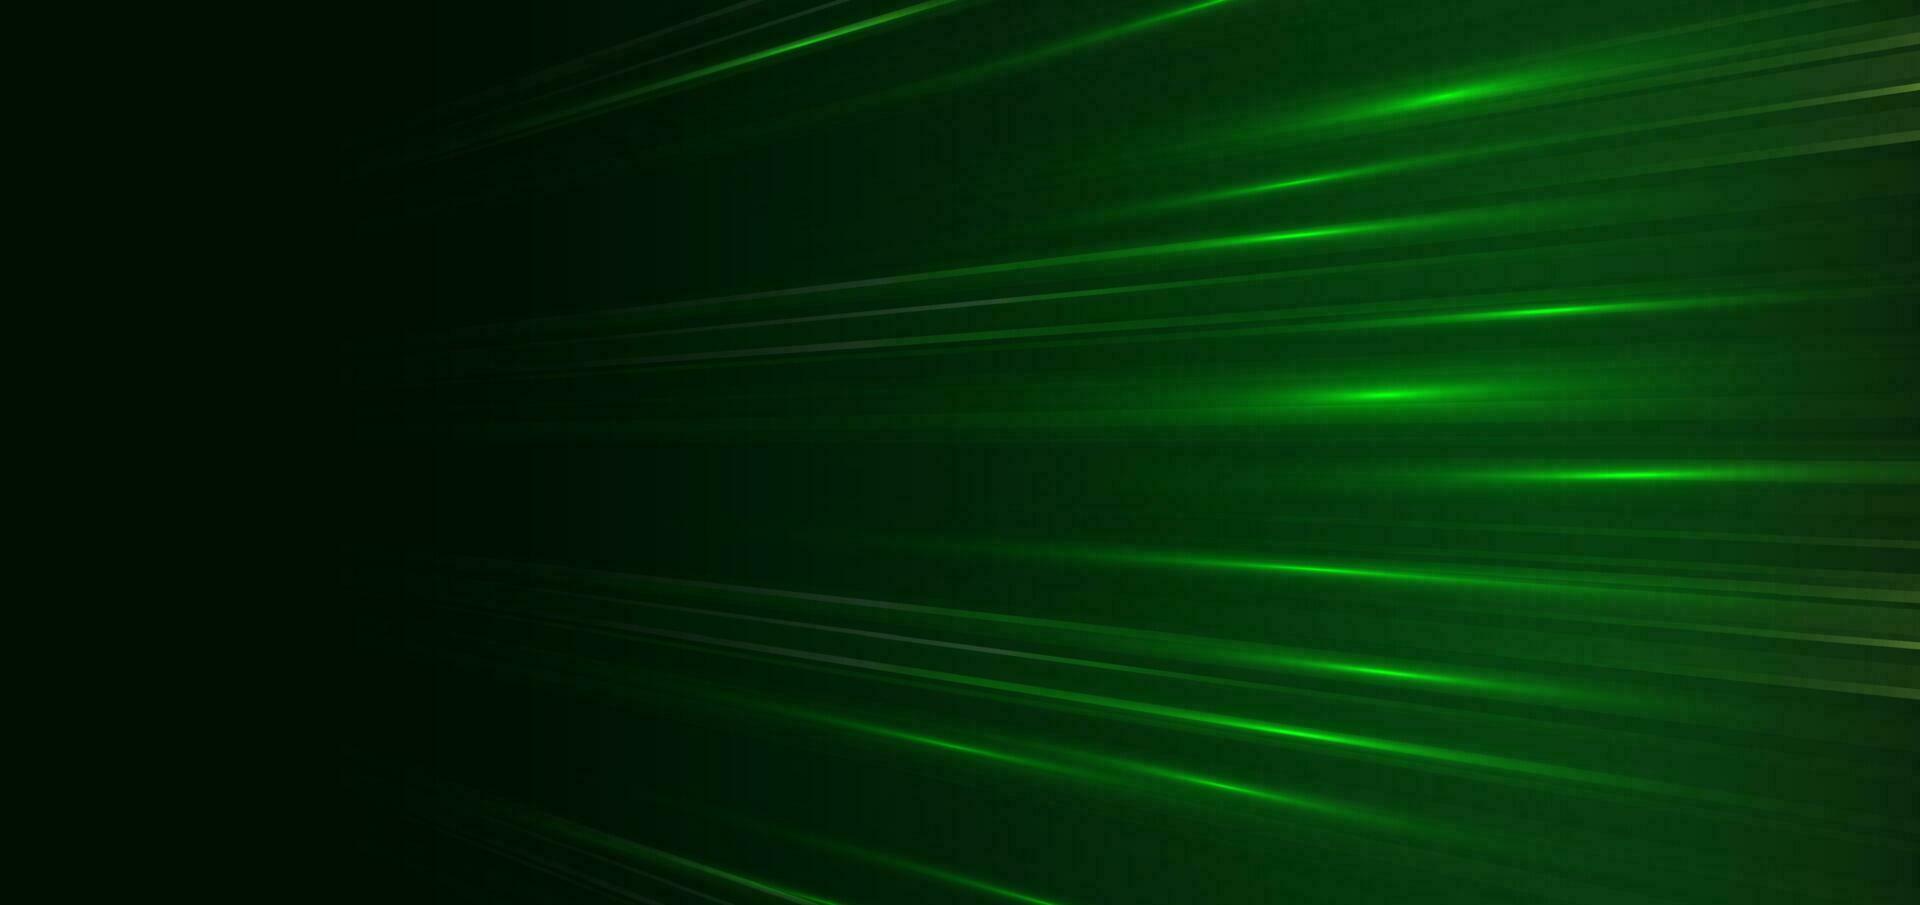 Abstract background diagonal speed motion light green stripe lines. You can use for ad, poster, template, business presentation. vector